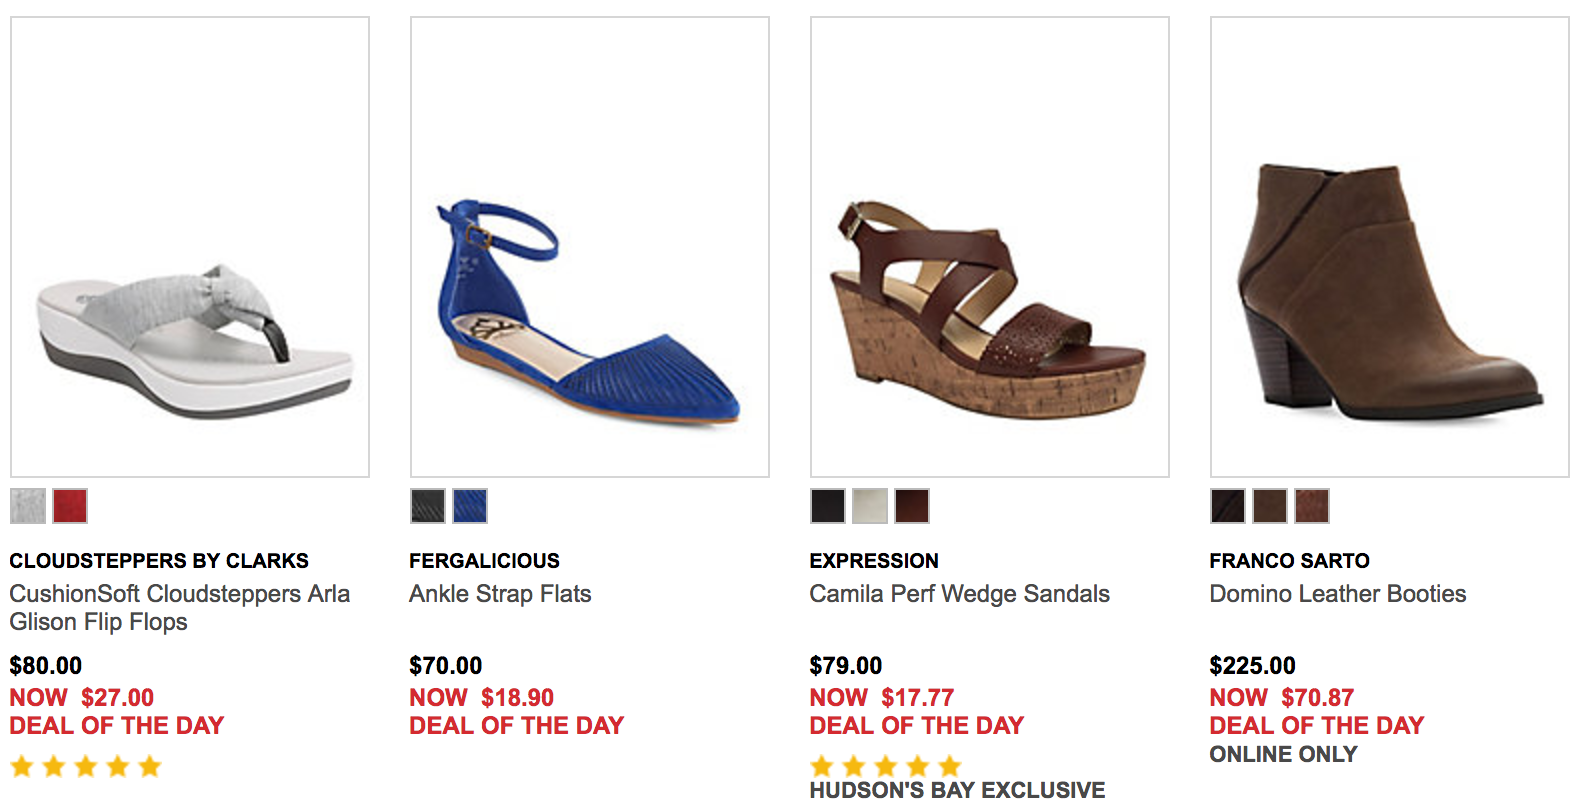 Save $15 Off Keds Shoes + Extra 55 